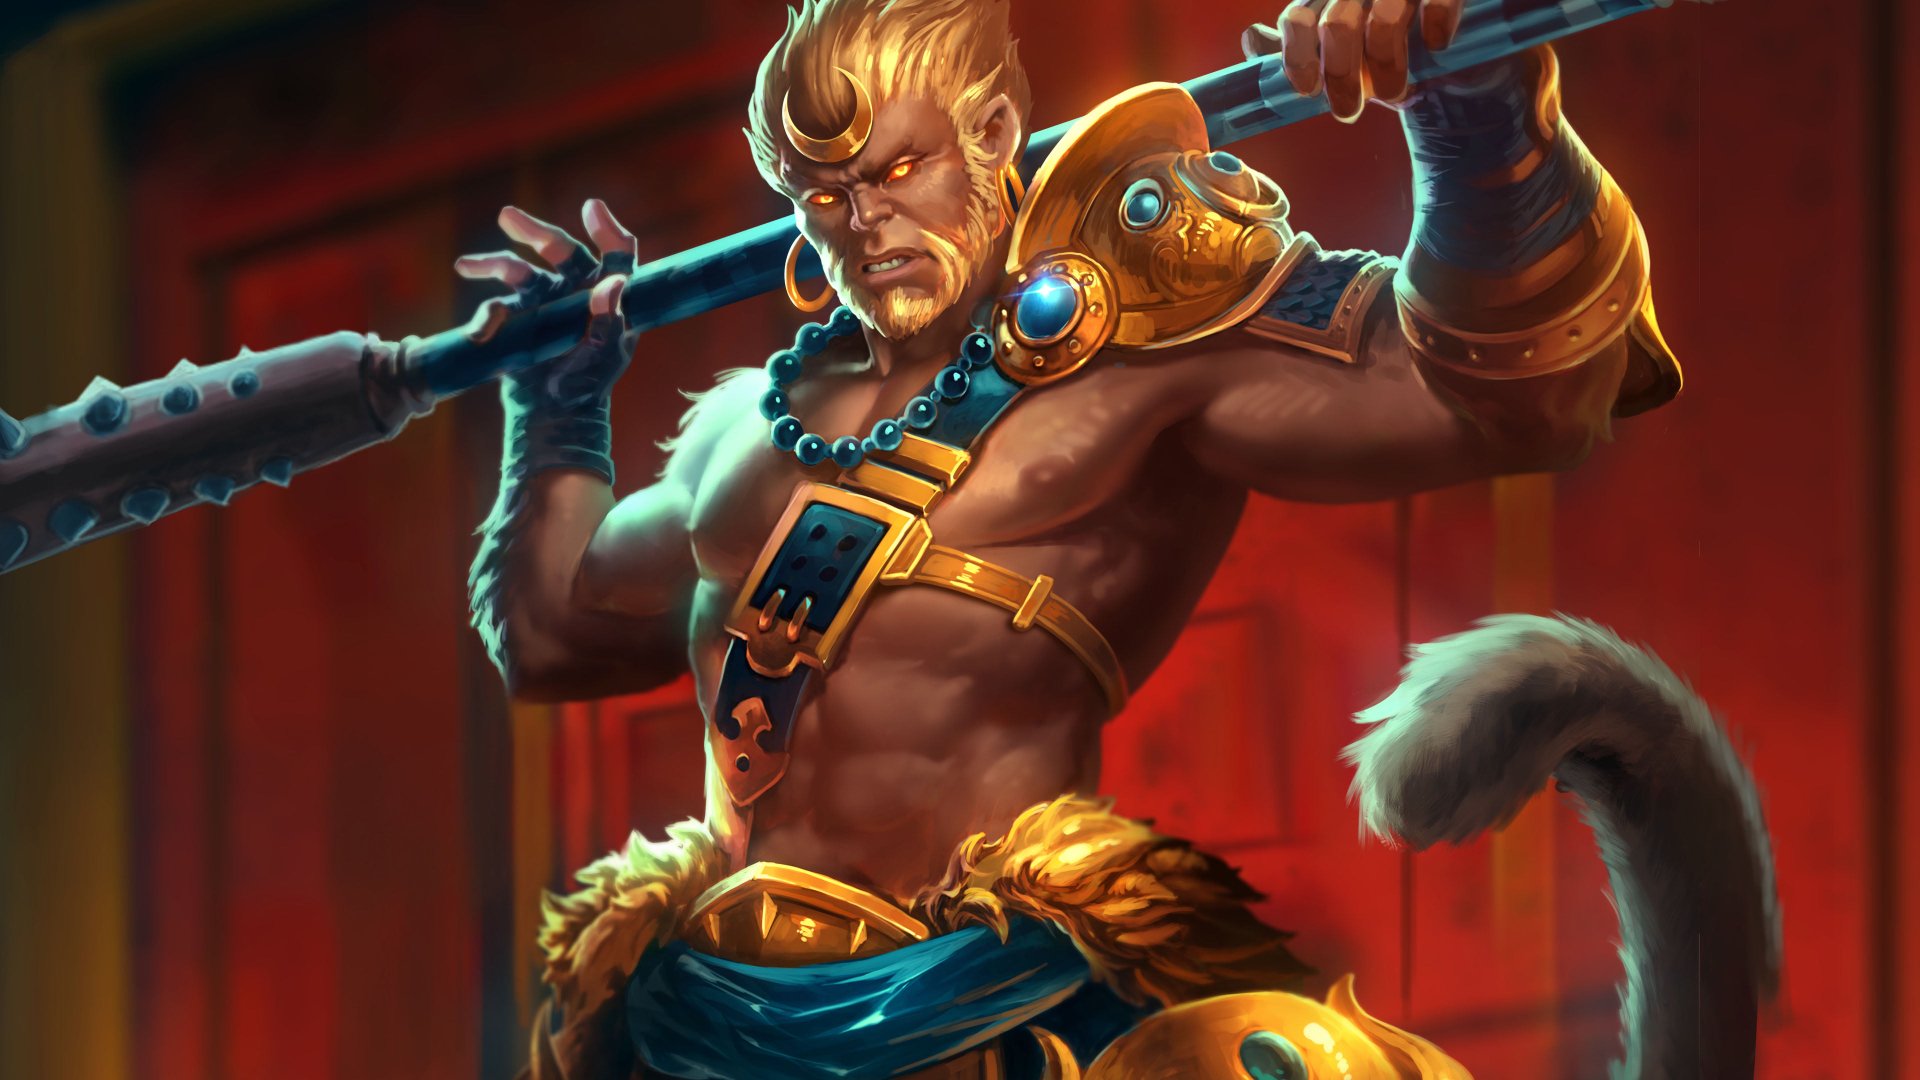 The Best Sun Wukong Build In Smite Dot Esports